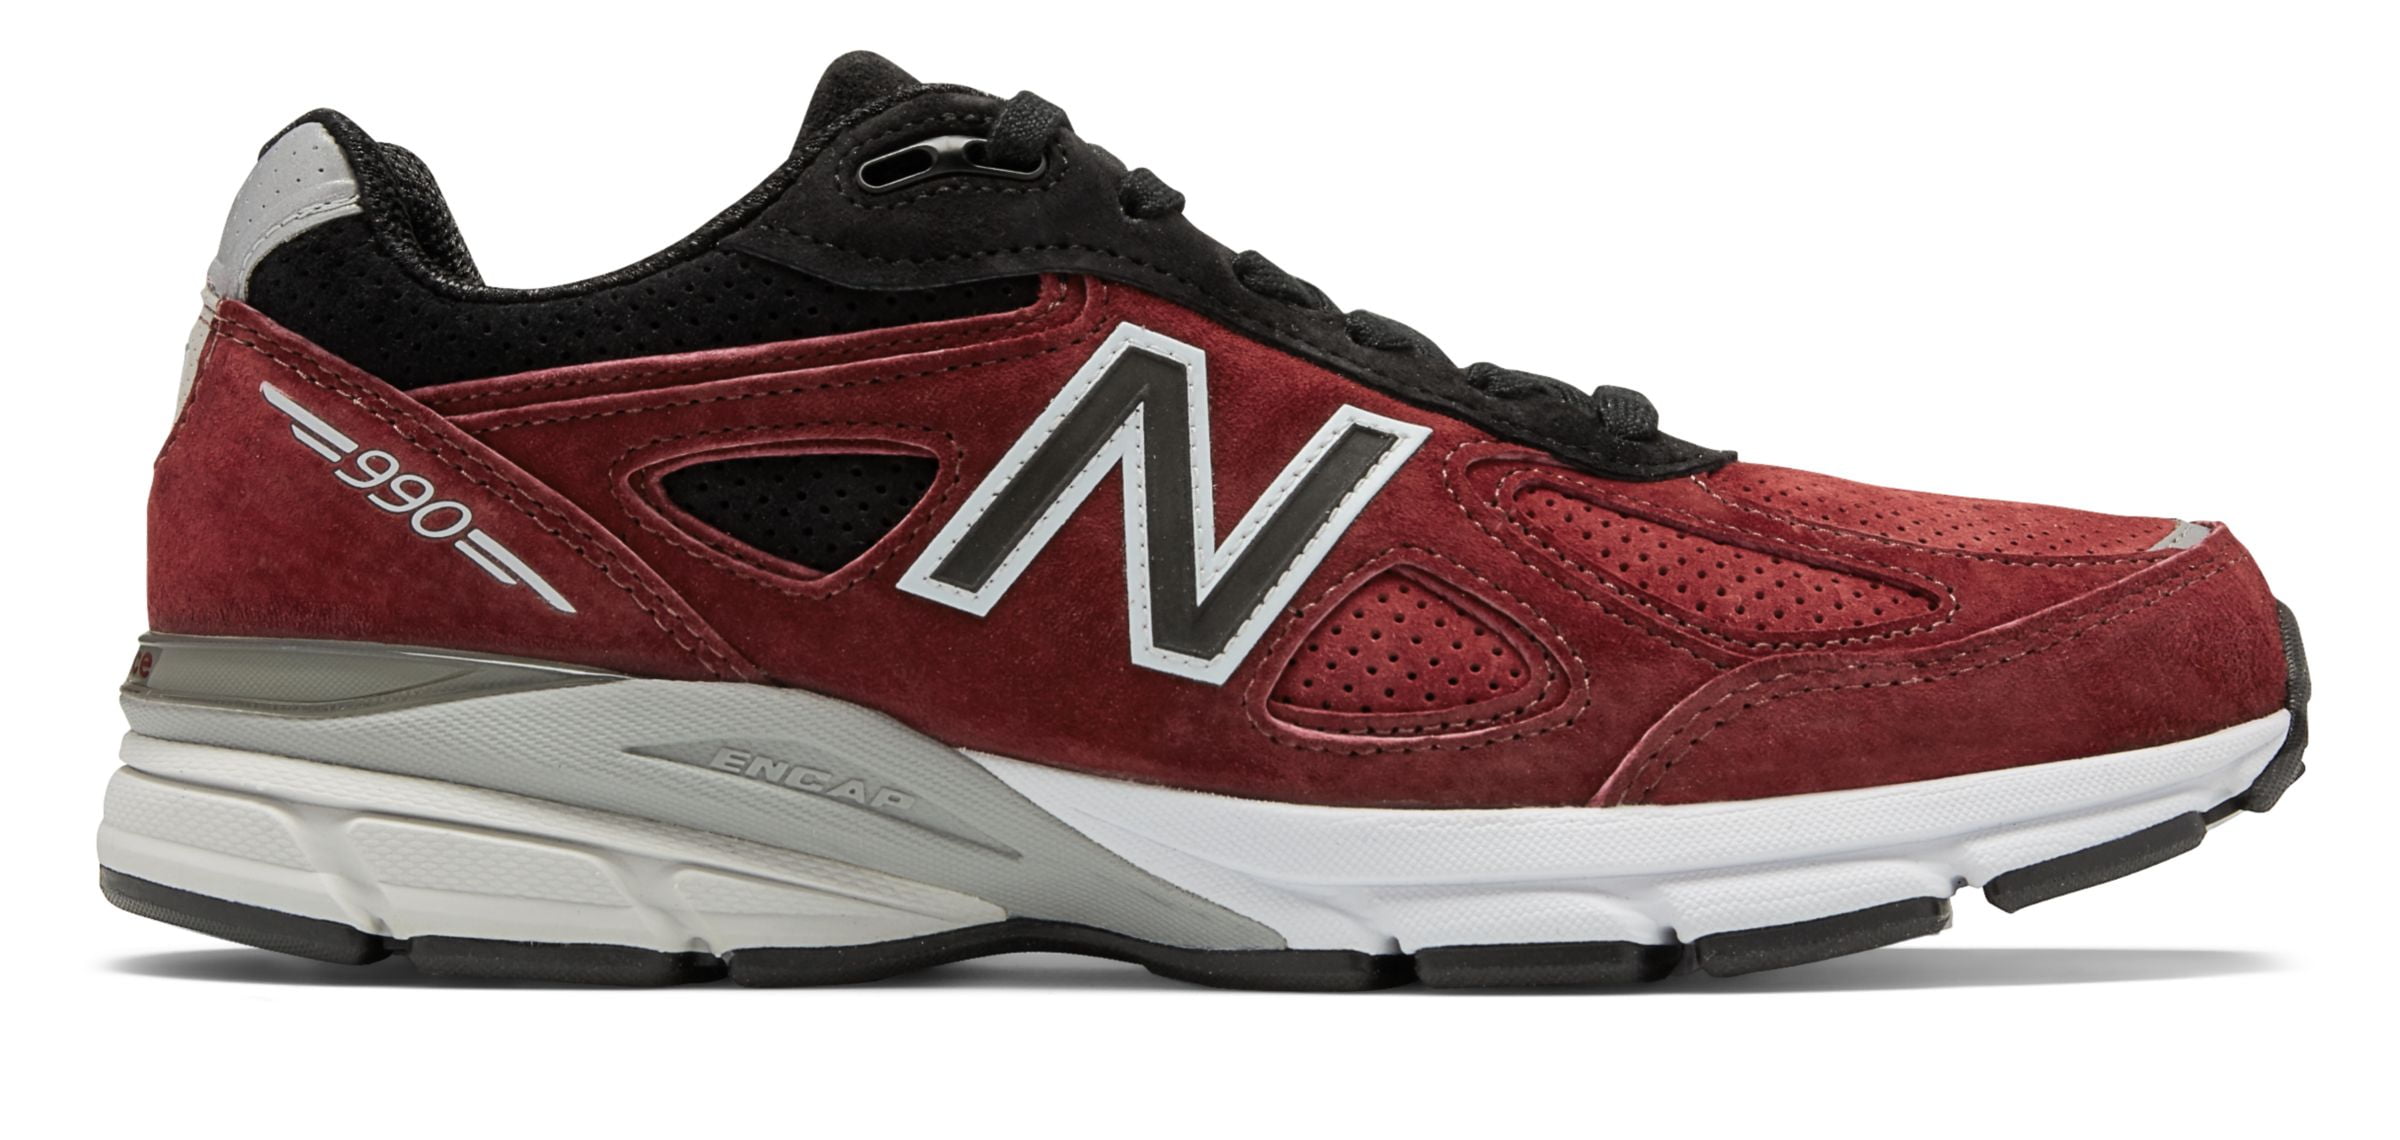 New Balance Men's 990v4 Made in US Shoes Red with Black - Walmart.com